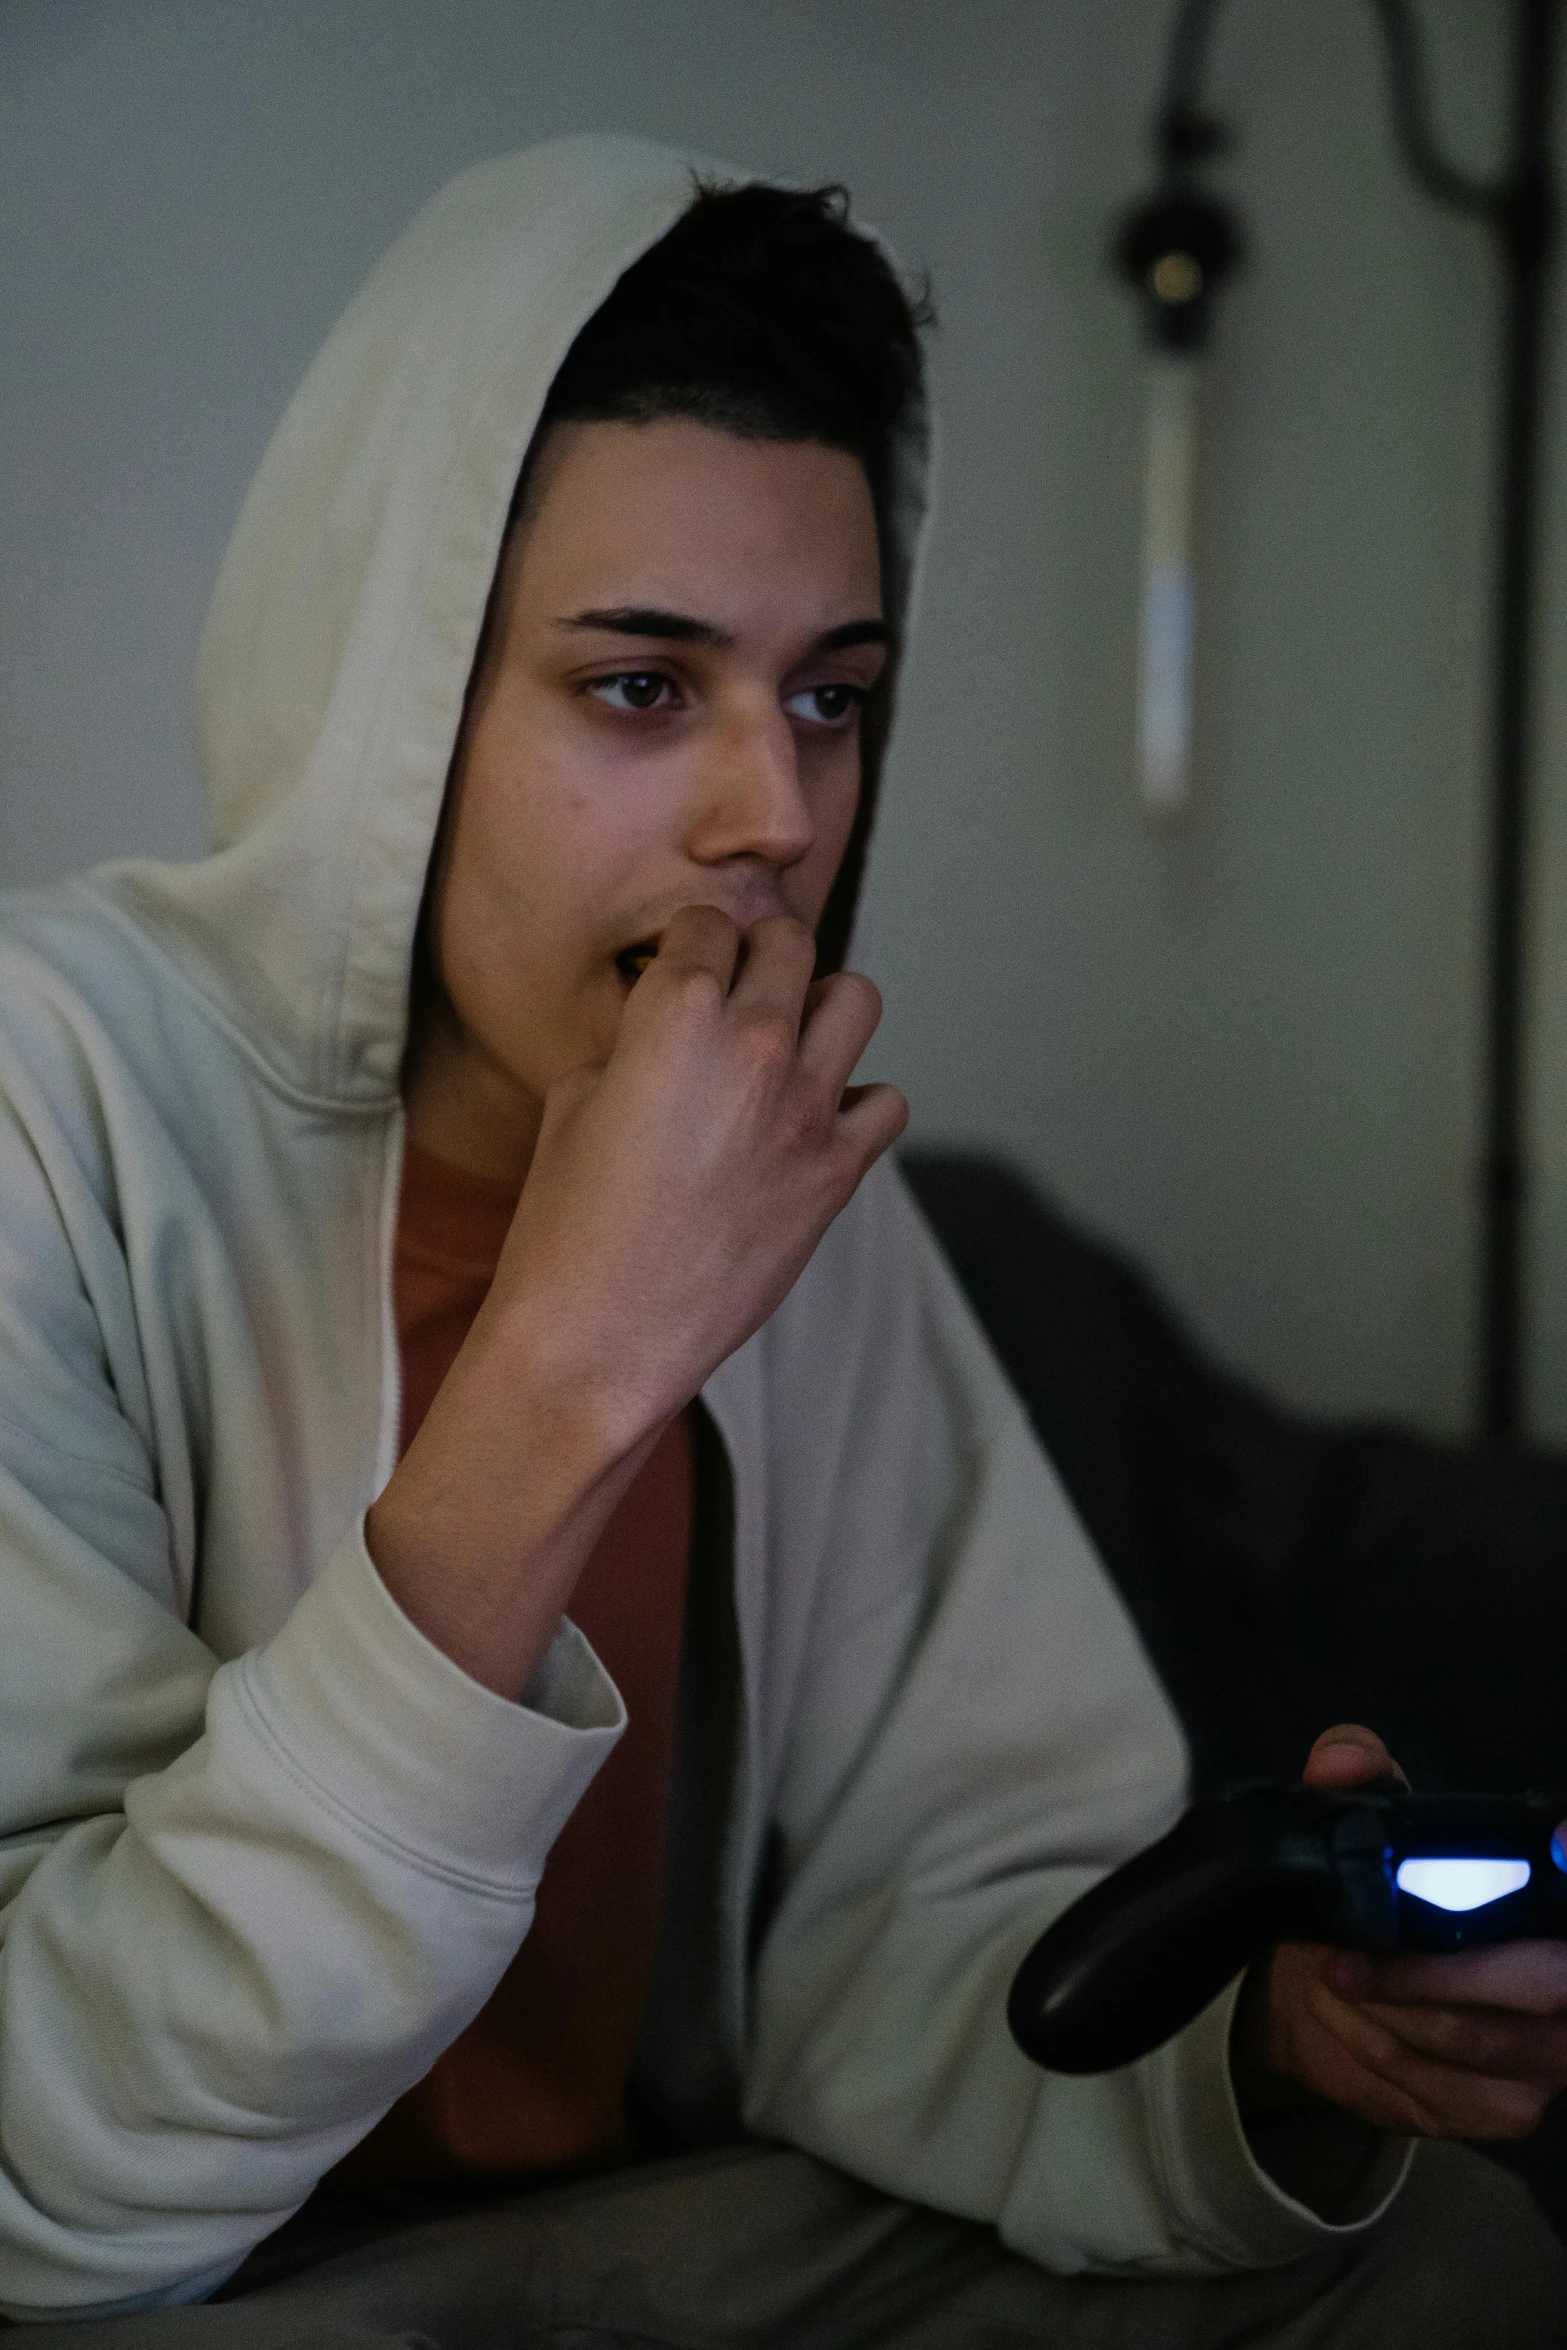 a person sitting on a couch holding a cell phone, reddit, wearing a hoody, smoking and bickering, 2020 video game screenshot, profile picture